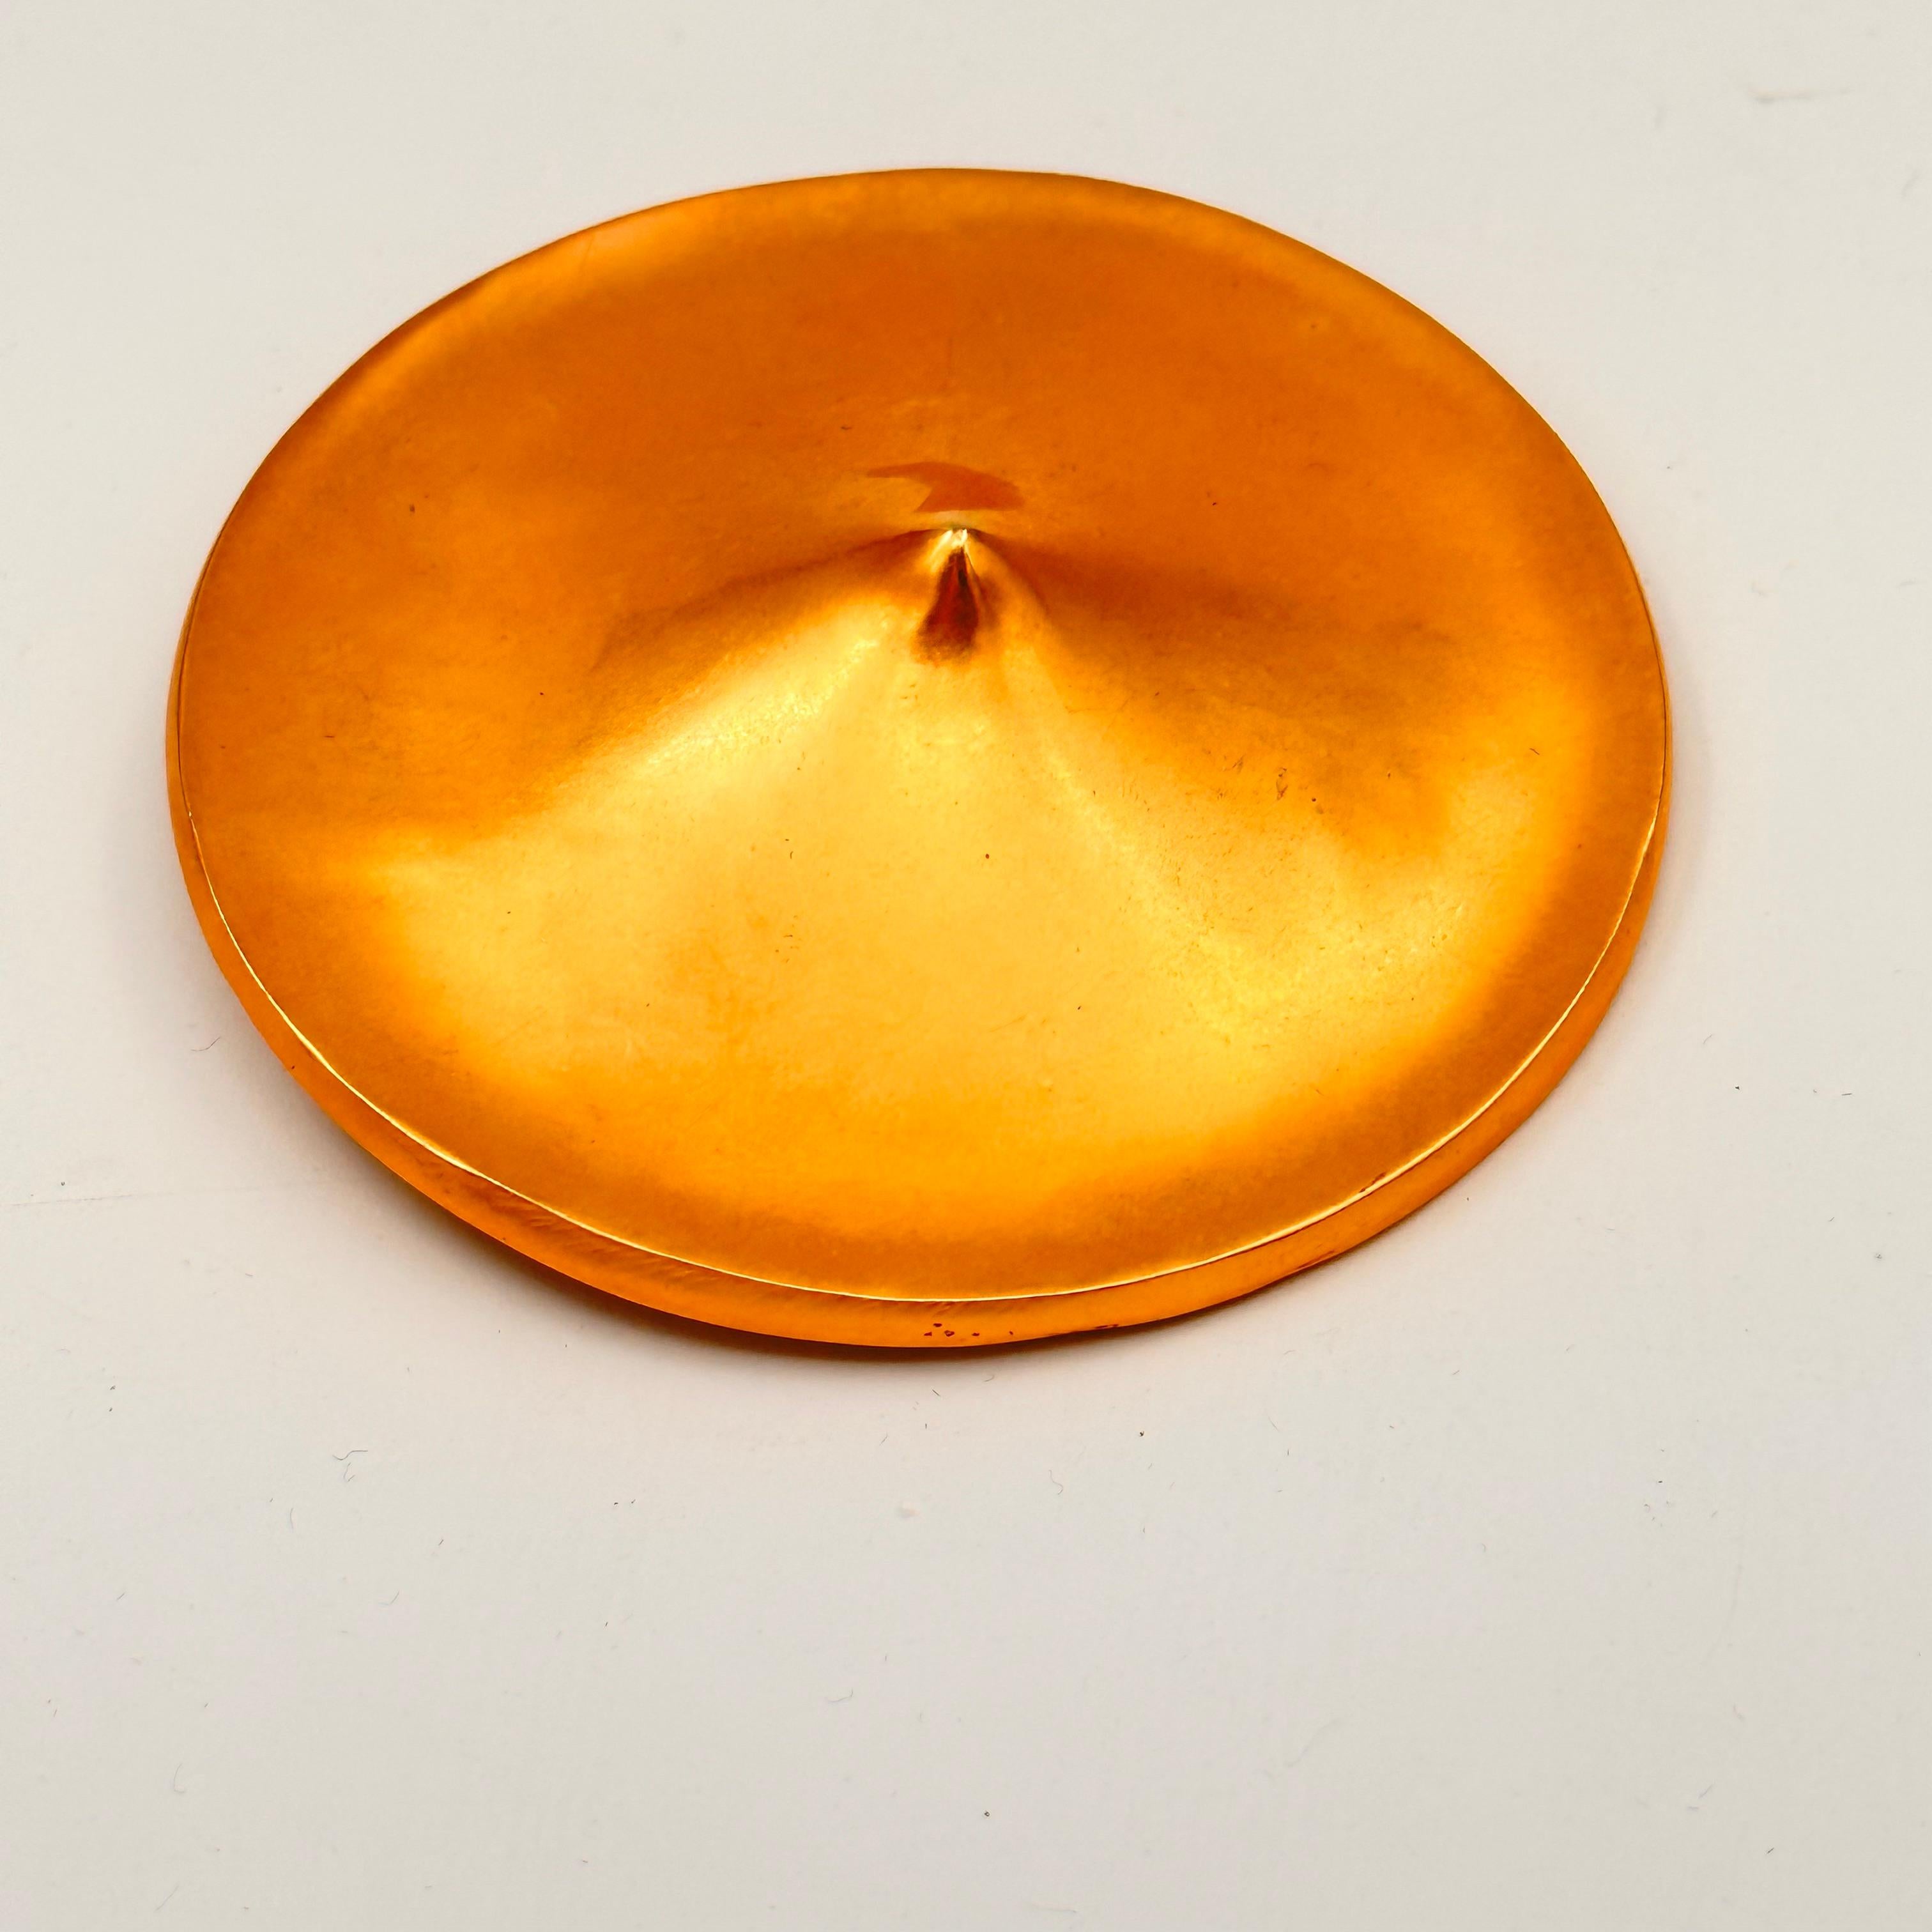 This very simple but strong shape, called a Gong, is gold plated brass, and is 3 inches diameter, a nice size for wearing on a jacket or coat. The way the disc comes to a point, like a classic Coolie hat, is subtle but distinctive. Created in the